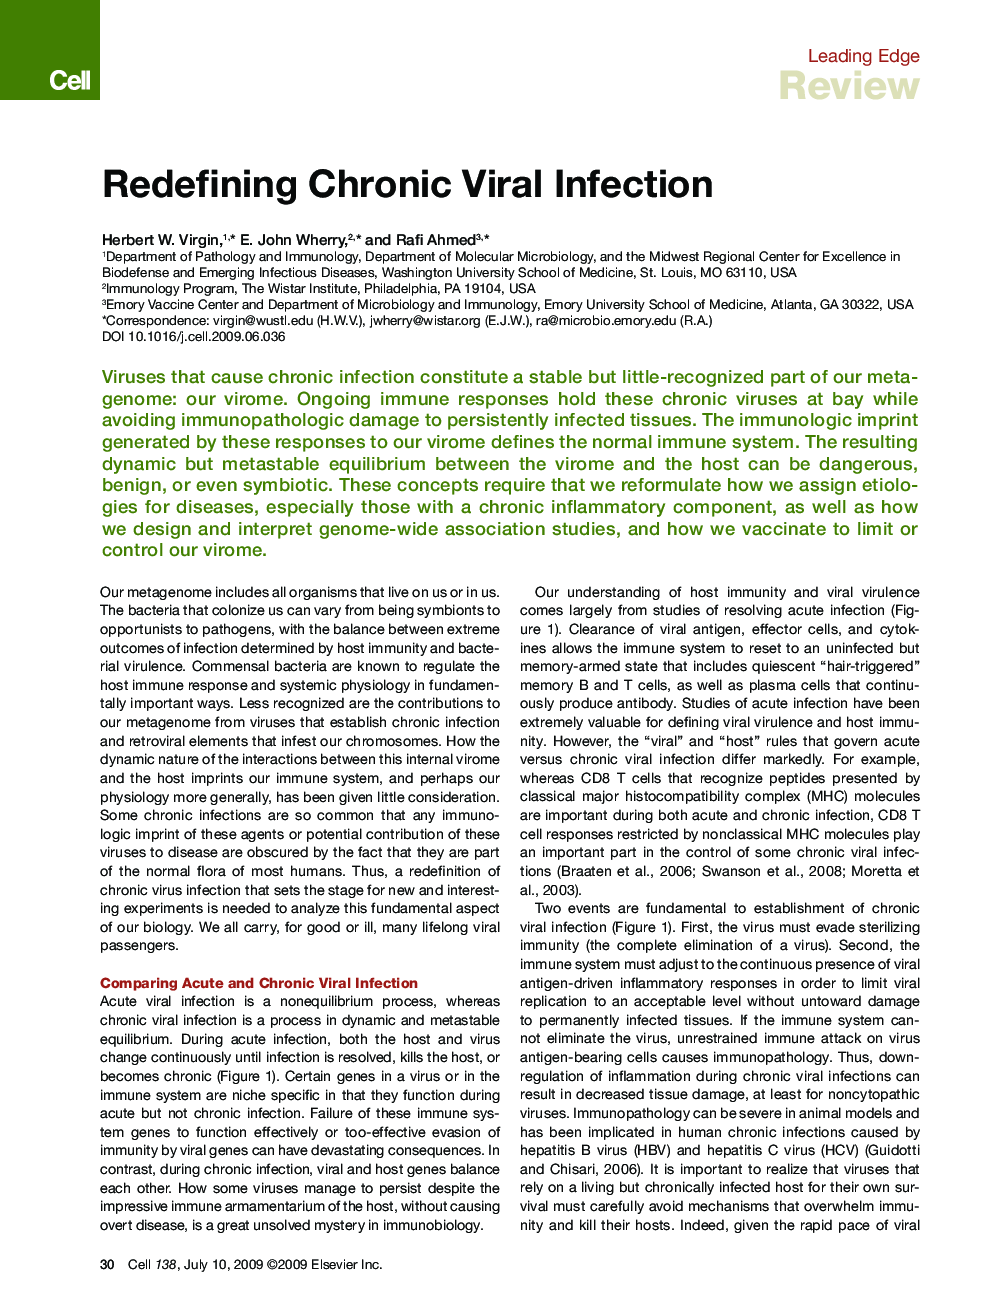 Redefining Chronic Viral Infection